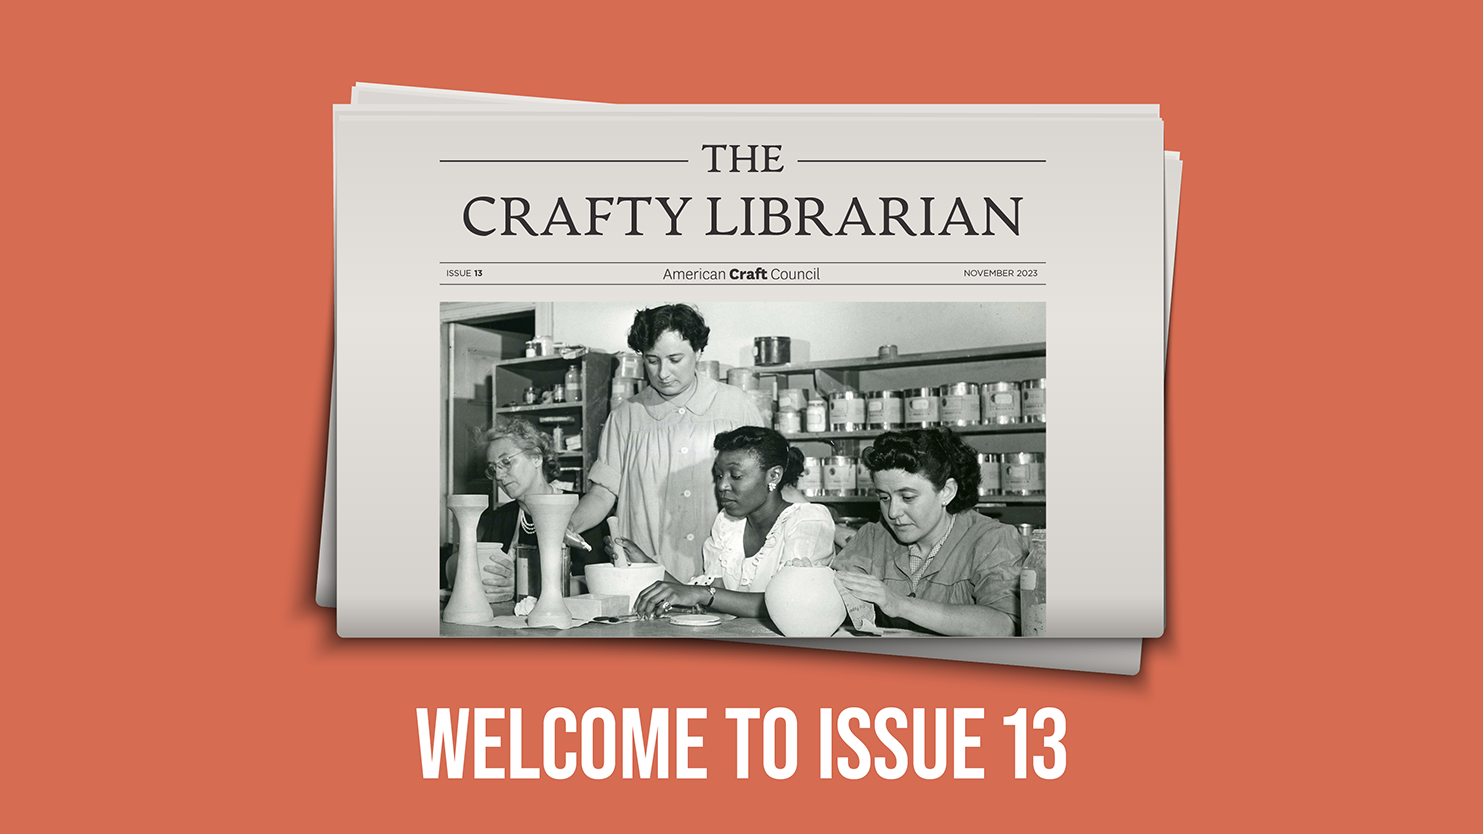 The Crafty Librarian Issue 13